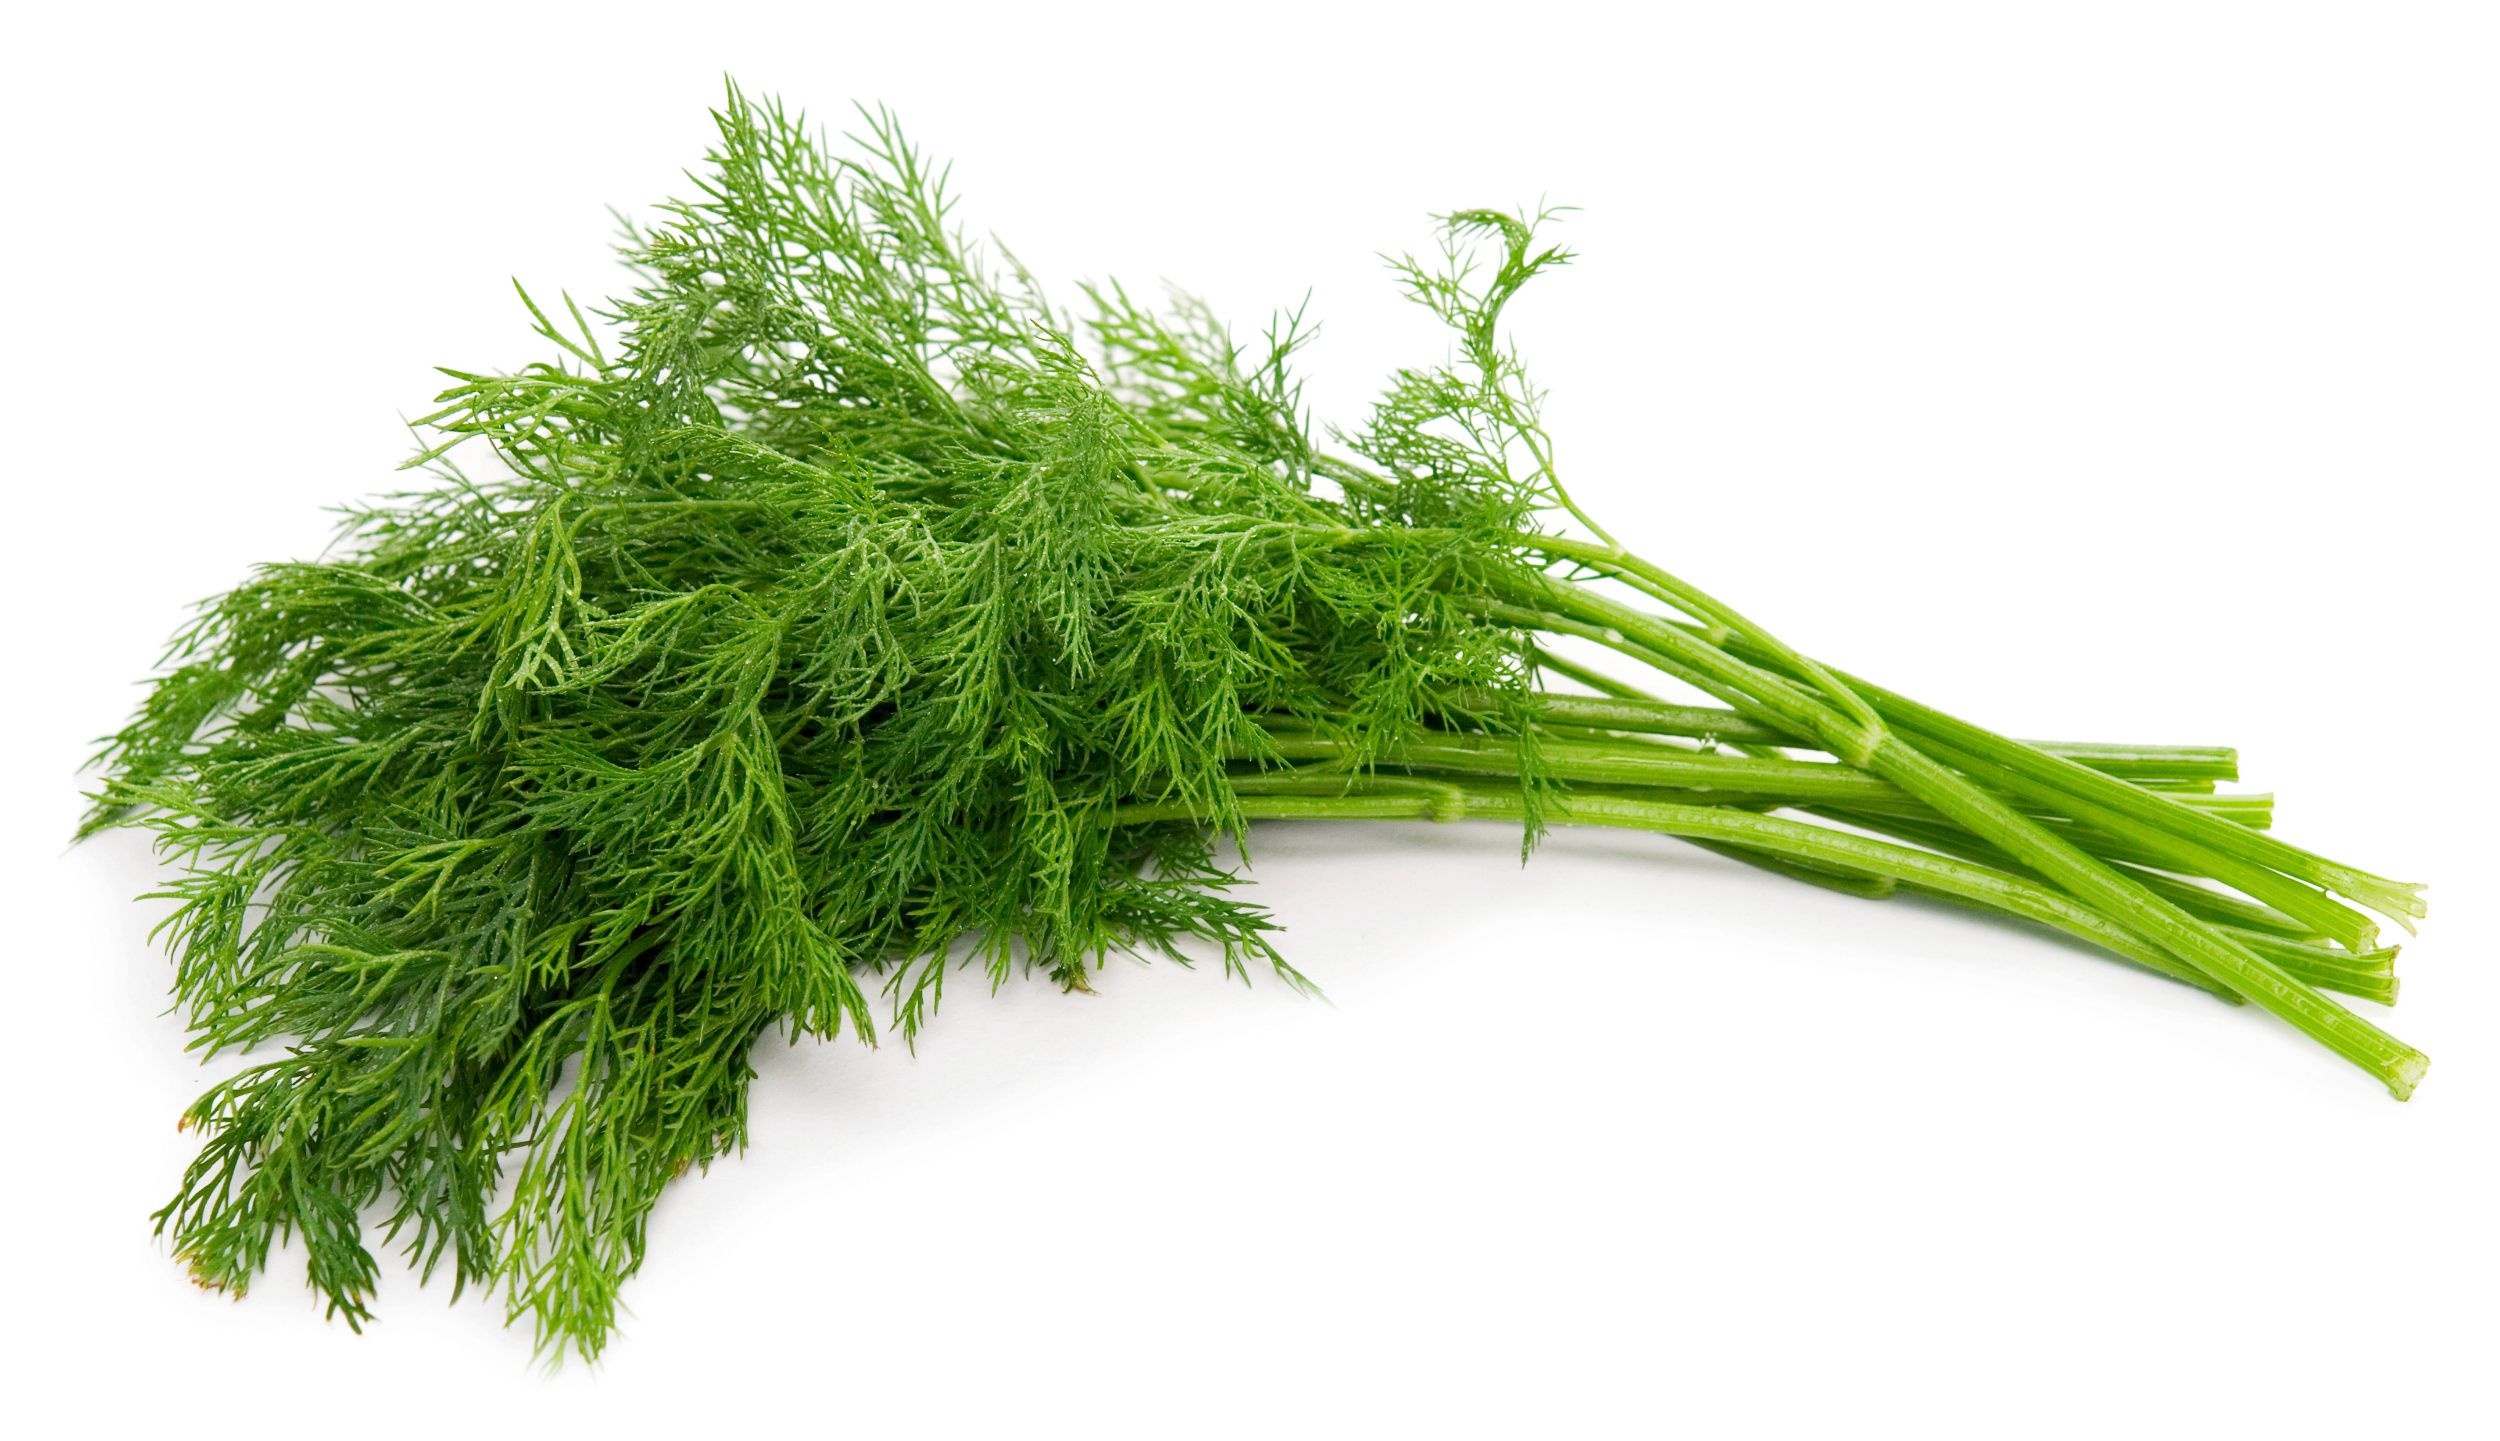 Online dill shopping, Herb's availability, Convenient purchase, Fresh culinary addition, 2500x1450 HD Desktop